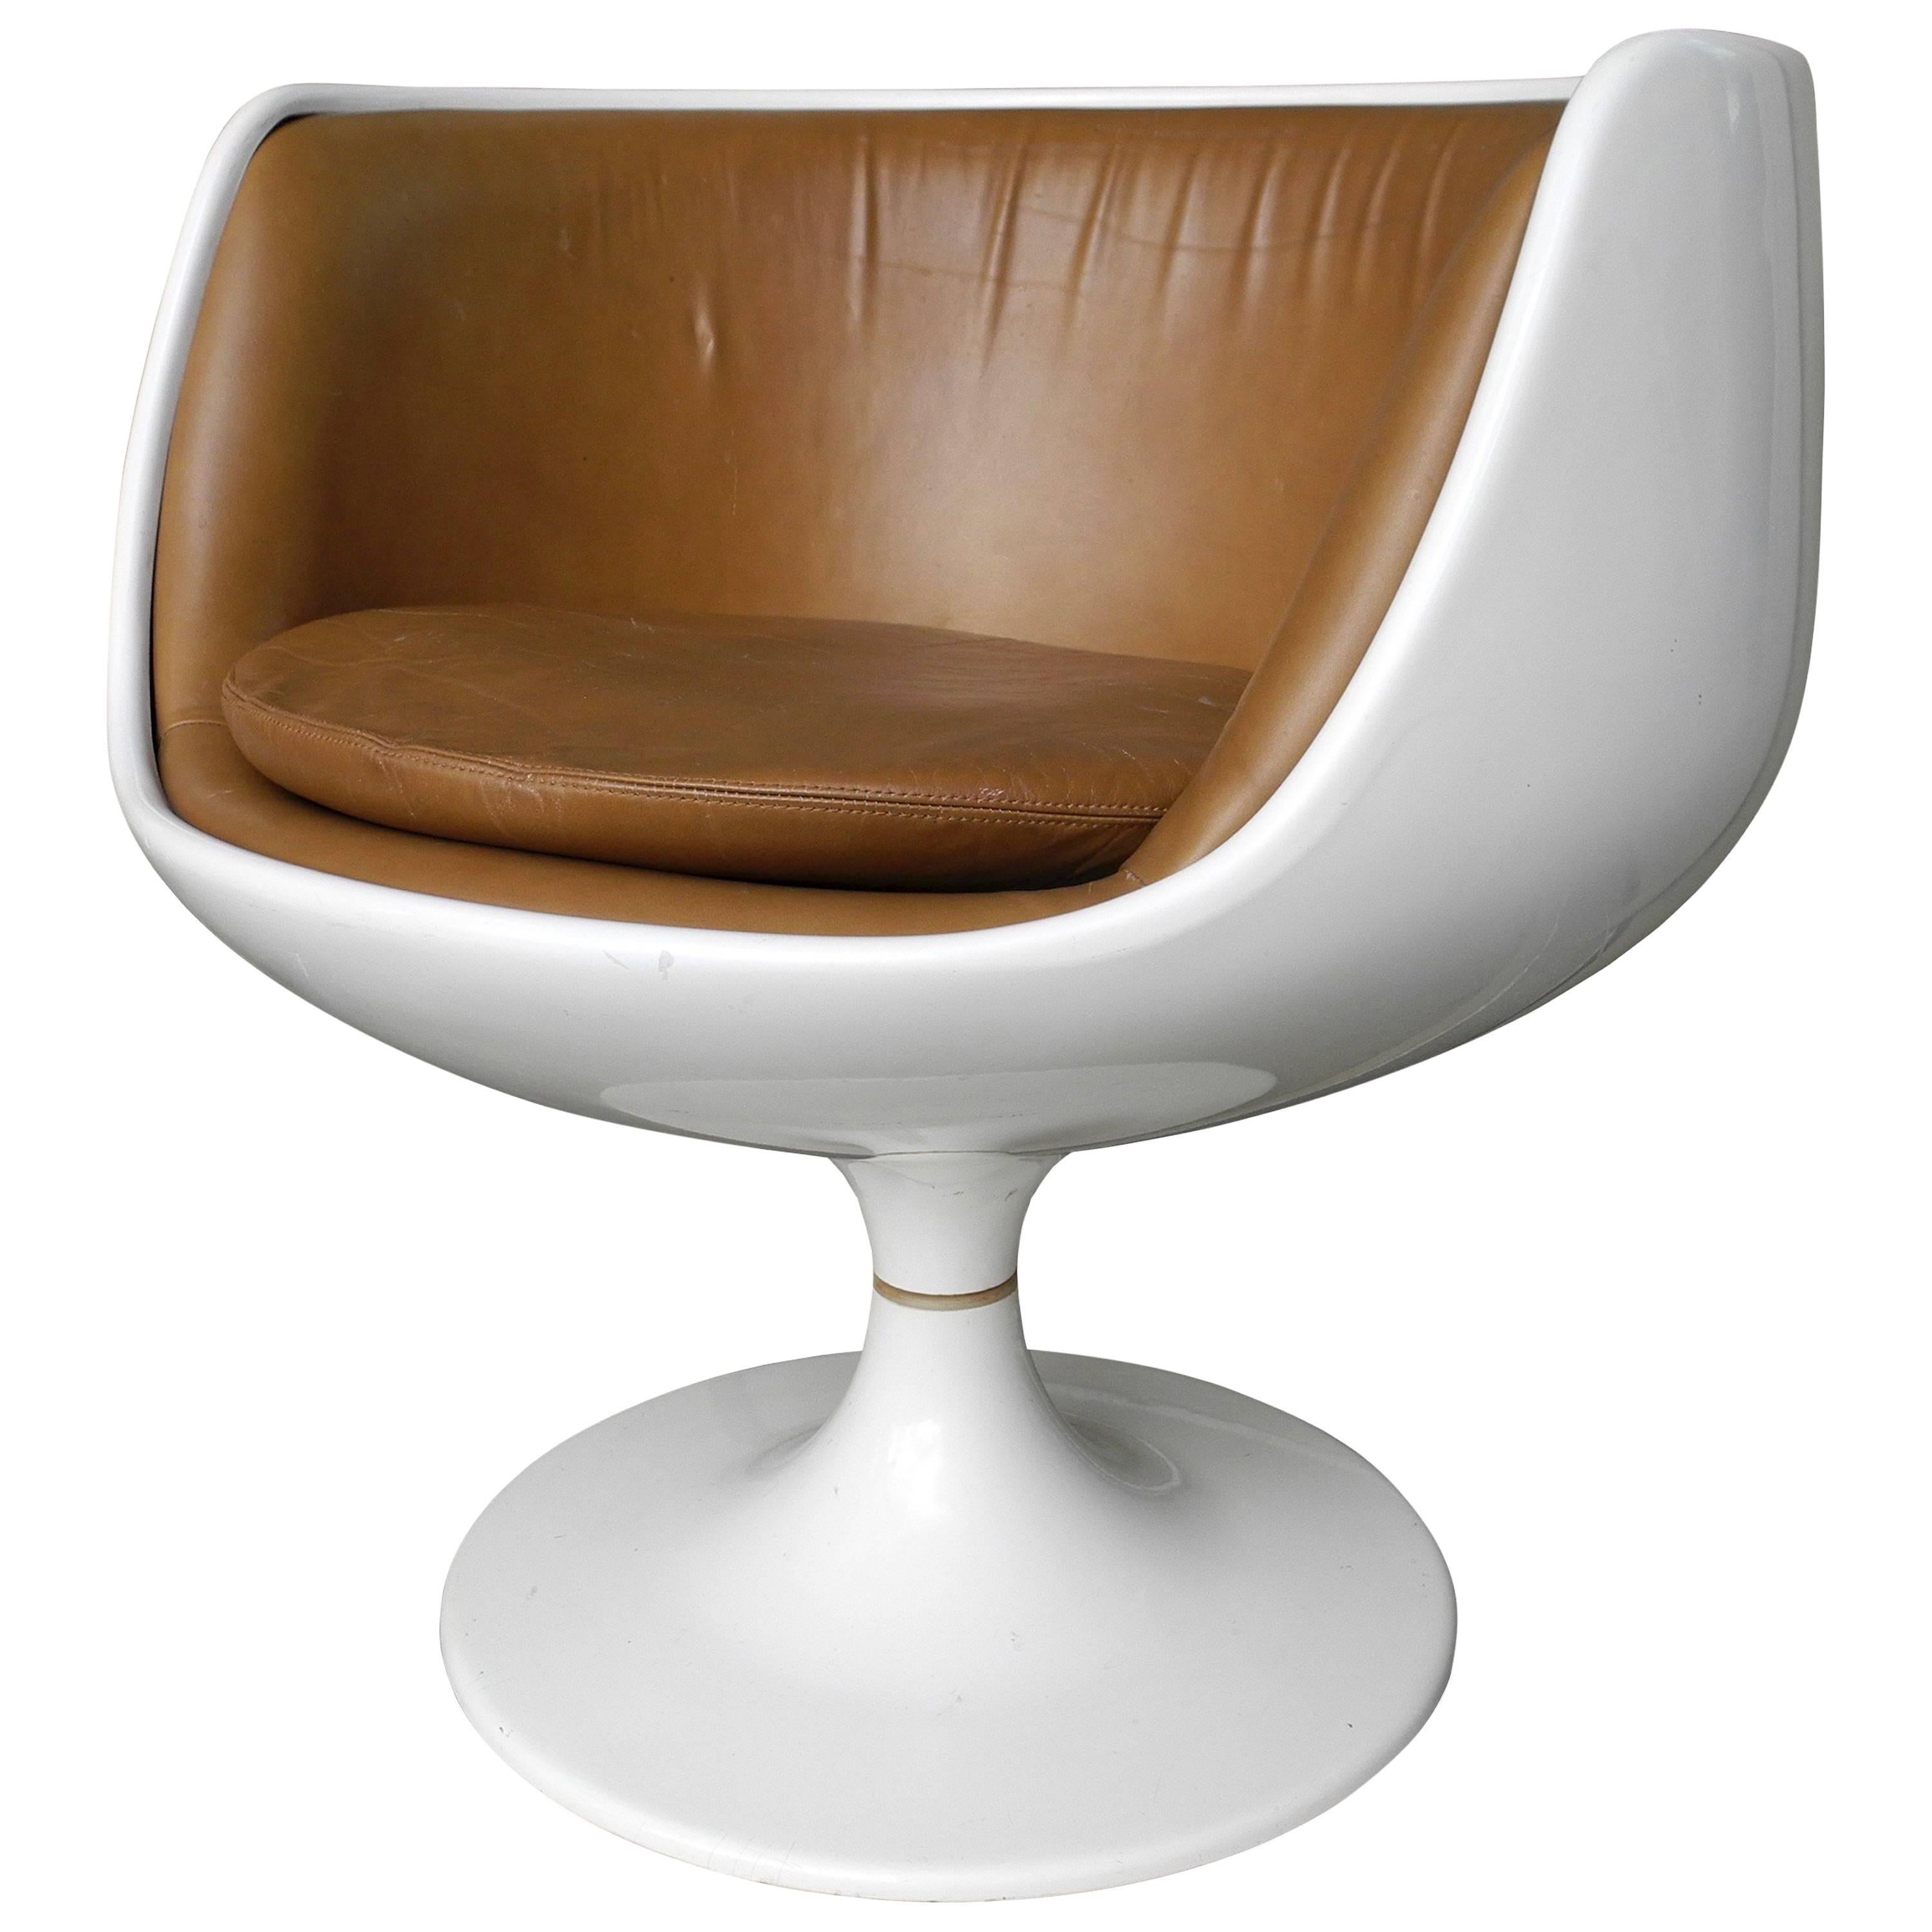 Cognac Chair with Leather Interior by Eero Aarnio for Asko, Finland, 1960s For Sale